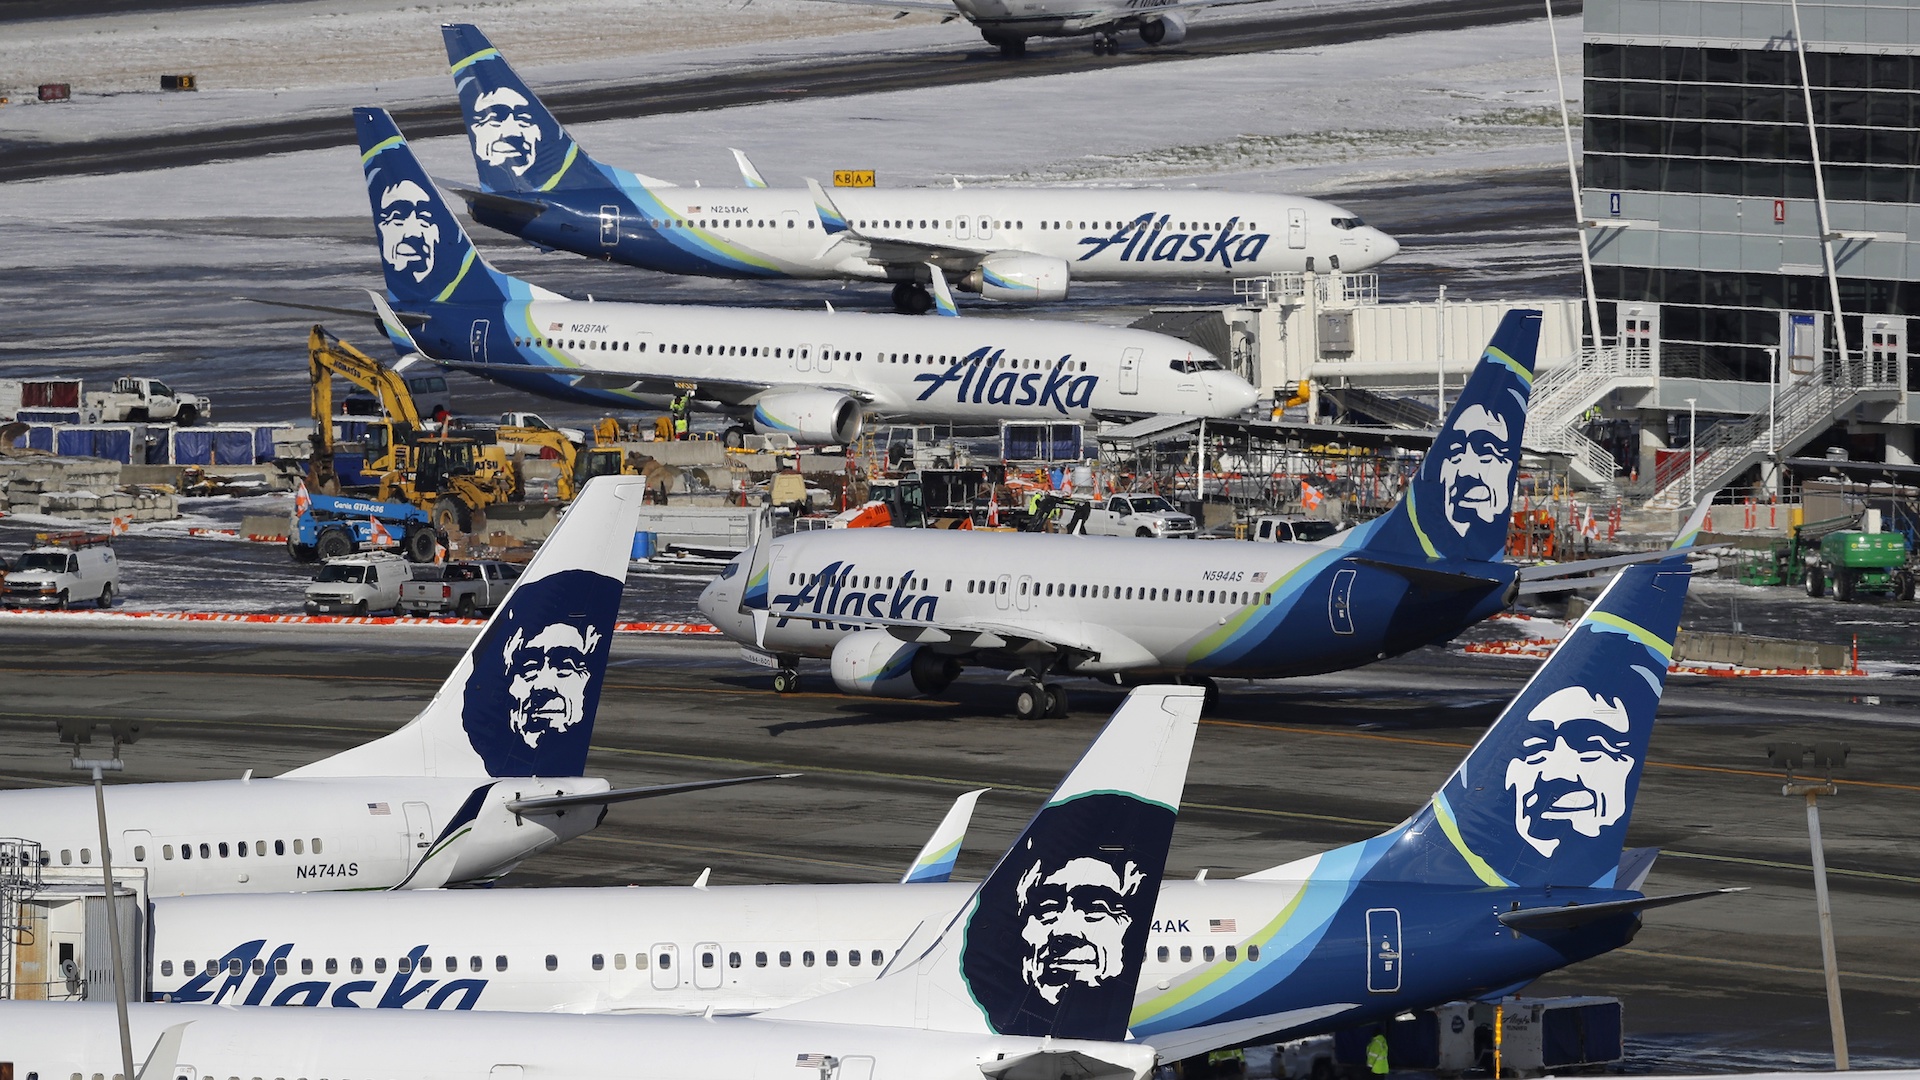 In this Feb. 5, 2019, file photo, Alaska Airlines planes are parked at a gate area at Seattle-Tacoma International Airport in Seattle. Alaska Airlines said over 300 employees among the company's workforce in Anchorage may lose their jobs on Oct. 1, 2020. (AP Photo/Ted S. Warren, File)